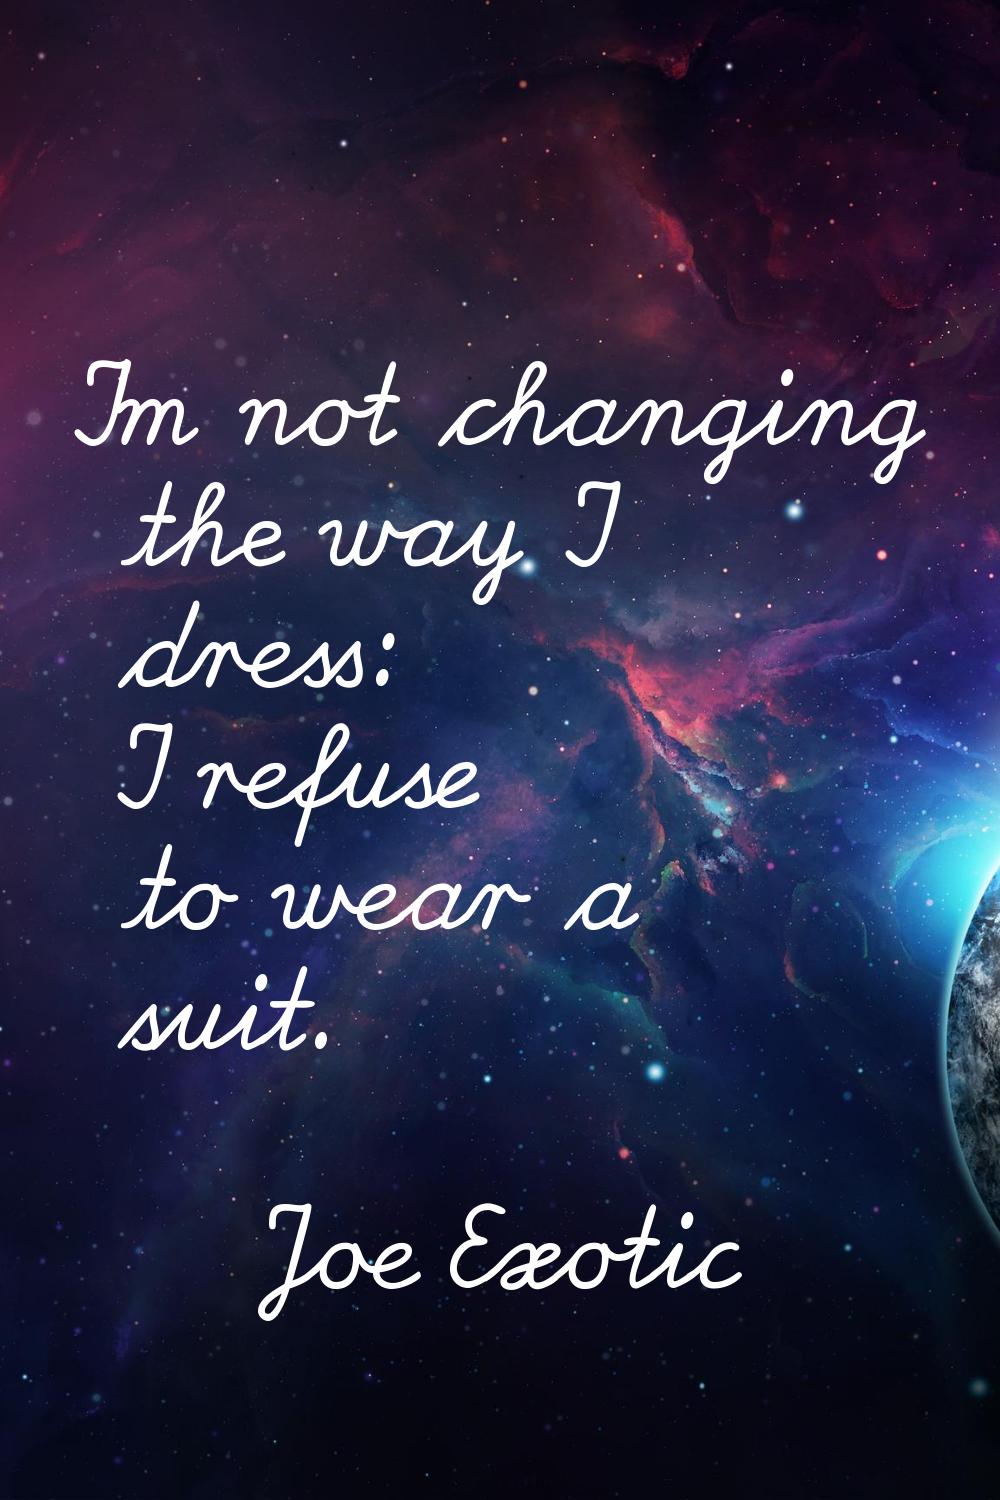 I'm not changing the way I dress: I refuse to wear a suit.